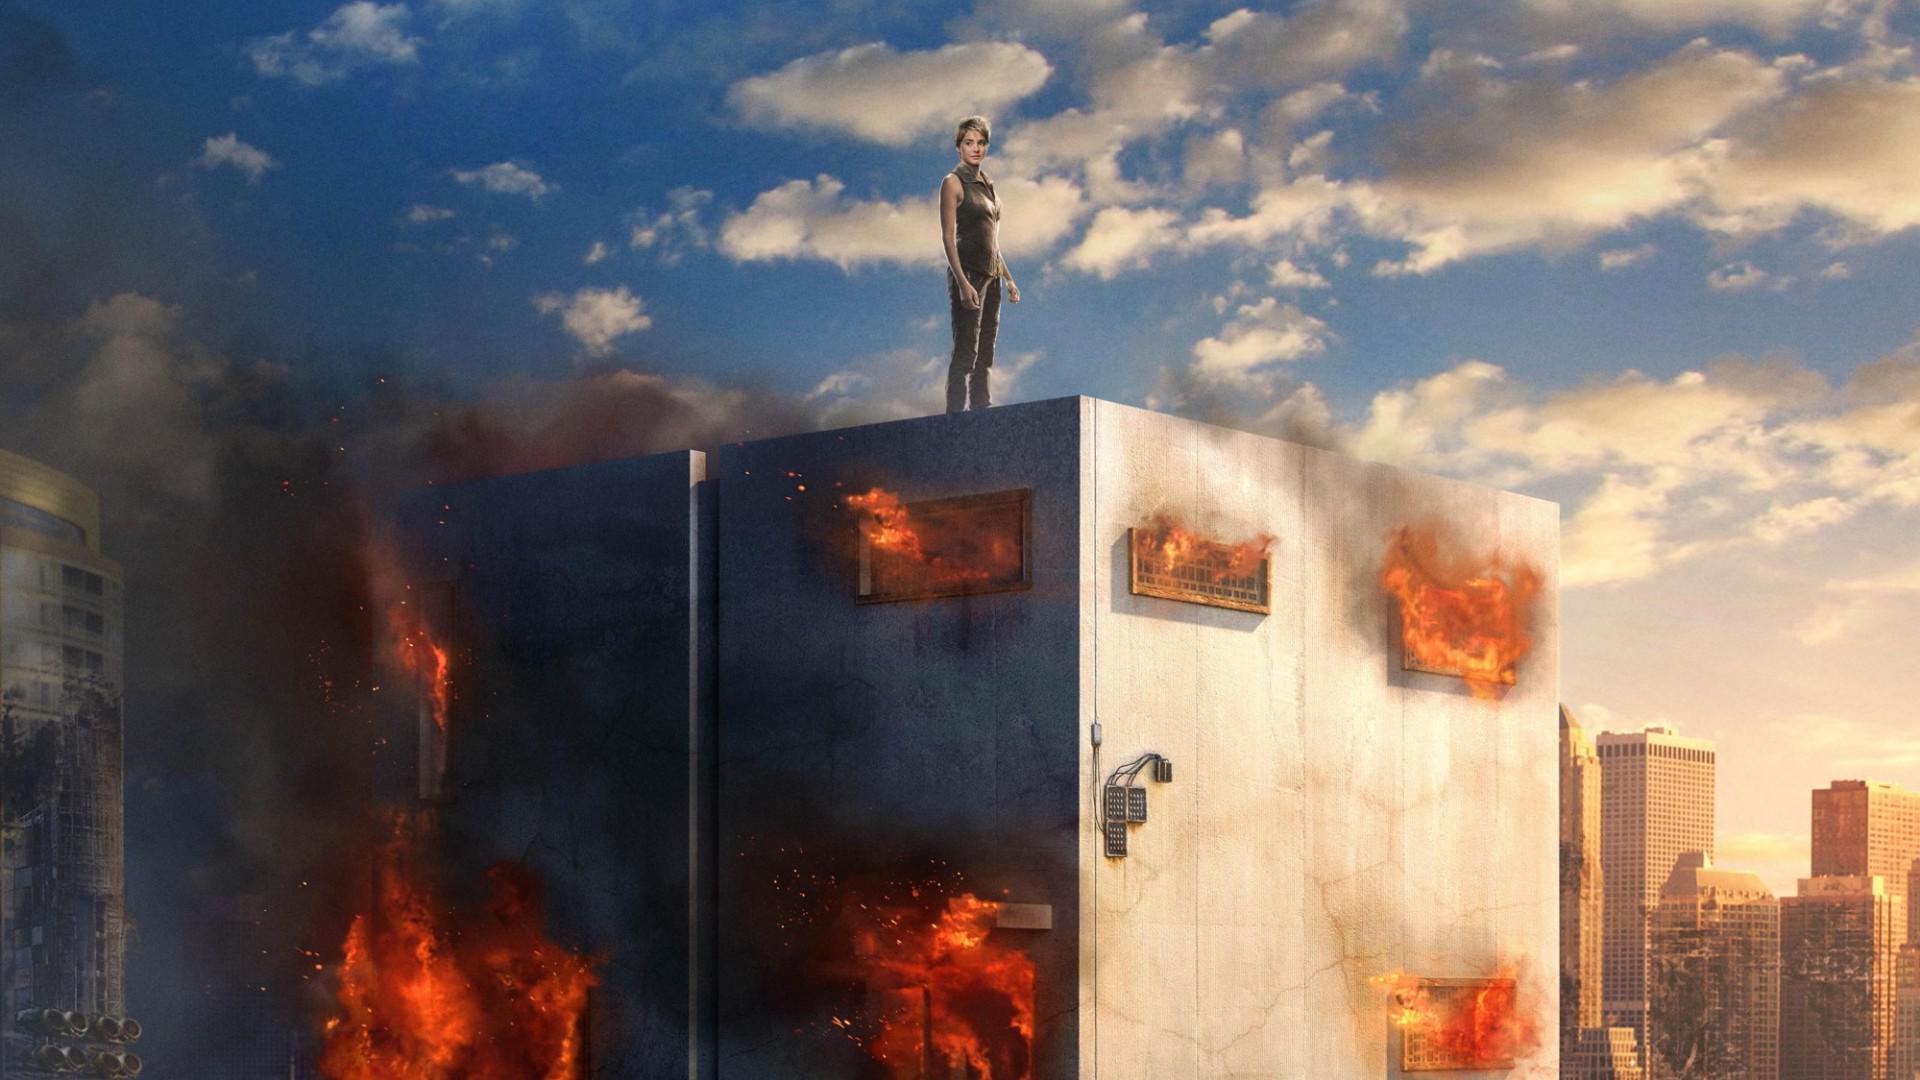 Insurgent 2015, woman on top of burning structure, movies, hollywood movies